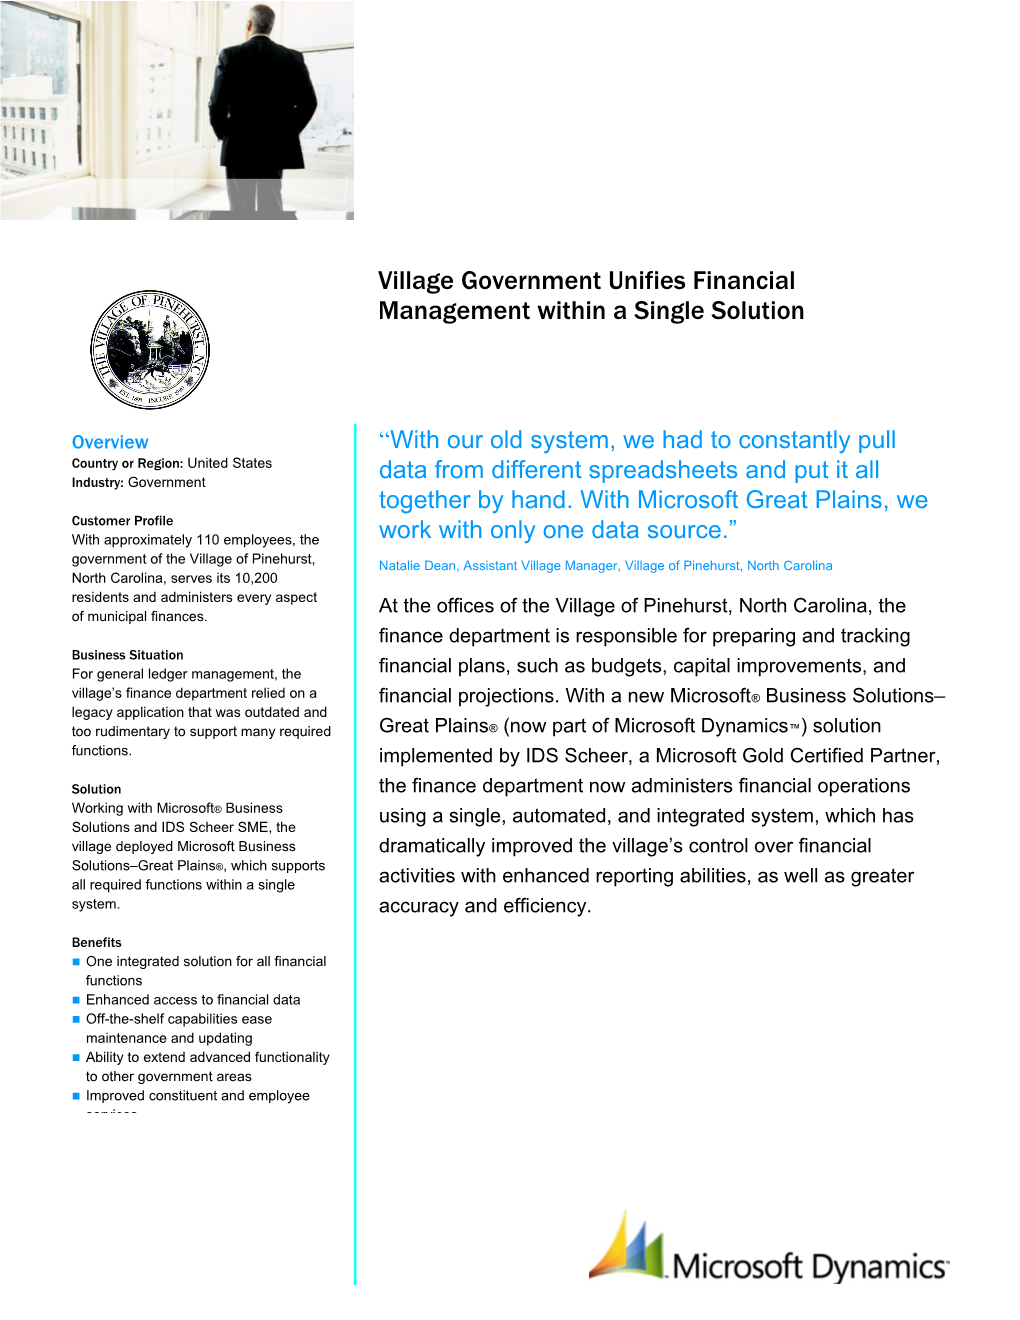 Village Government Unifies Financial Management Within a Single Solution